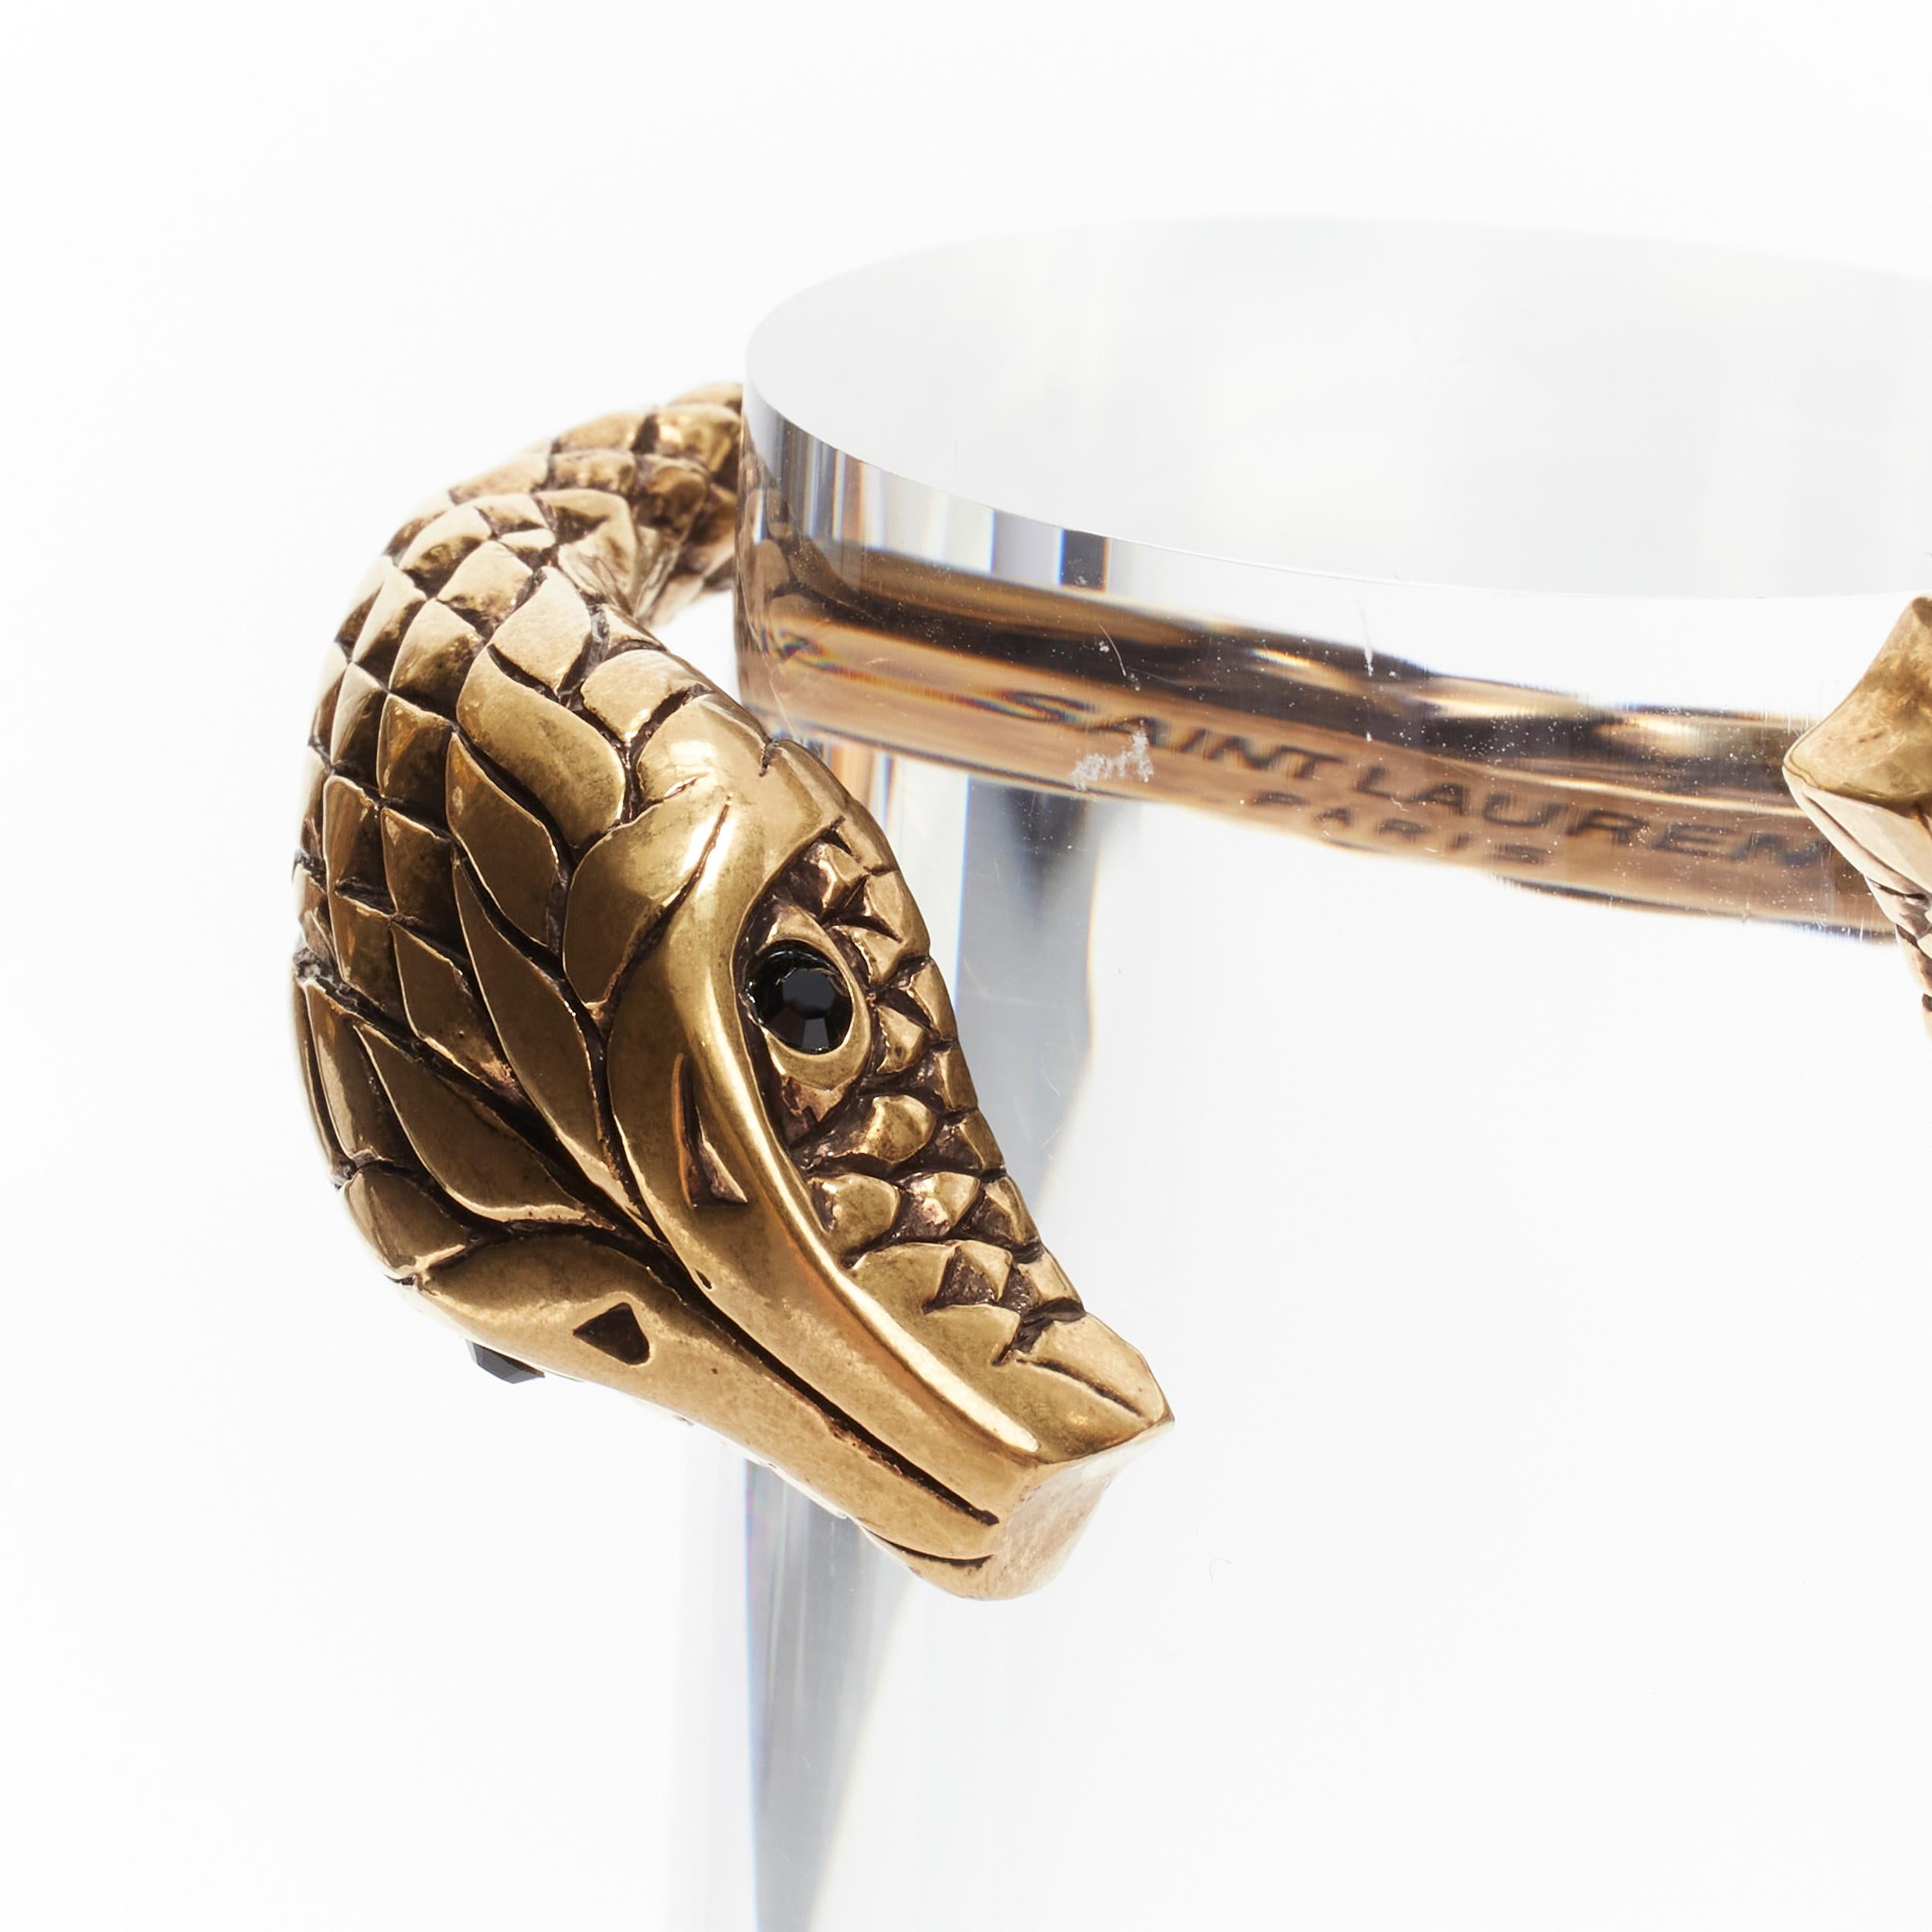 rare SAINT LAURENT Hedi Slimane dual Serpentine head crystal eye cuff bracelet 
Reference: TGAS/B01693 
Brand: Saint Laurent 
Designer: Hedi Slimane 
Material: Metal 
Color: Gold 
Pattern: Solid 
Extra Detail: Black crystal eyes. 

CONDITION: